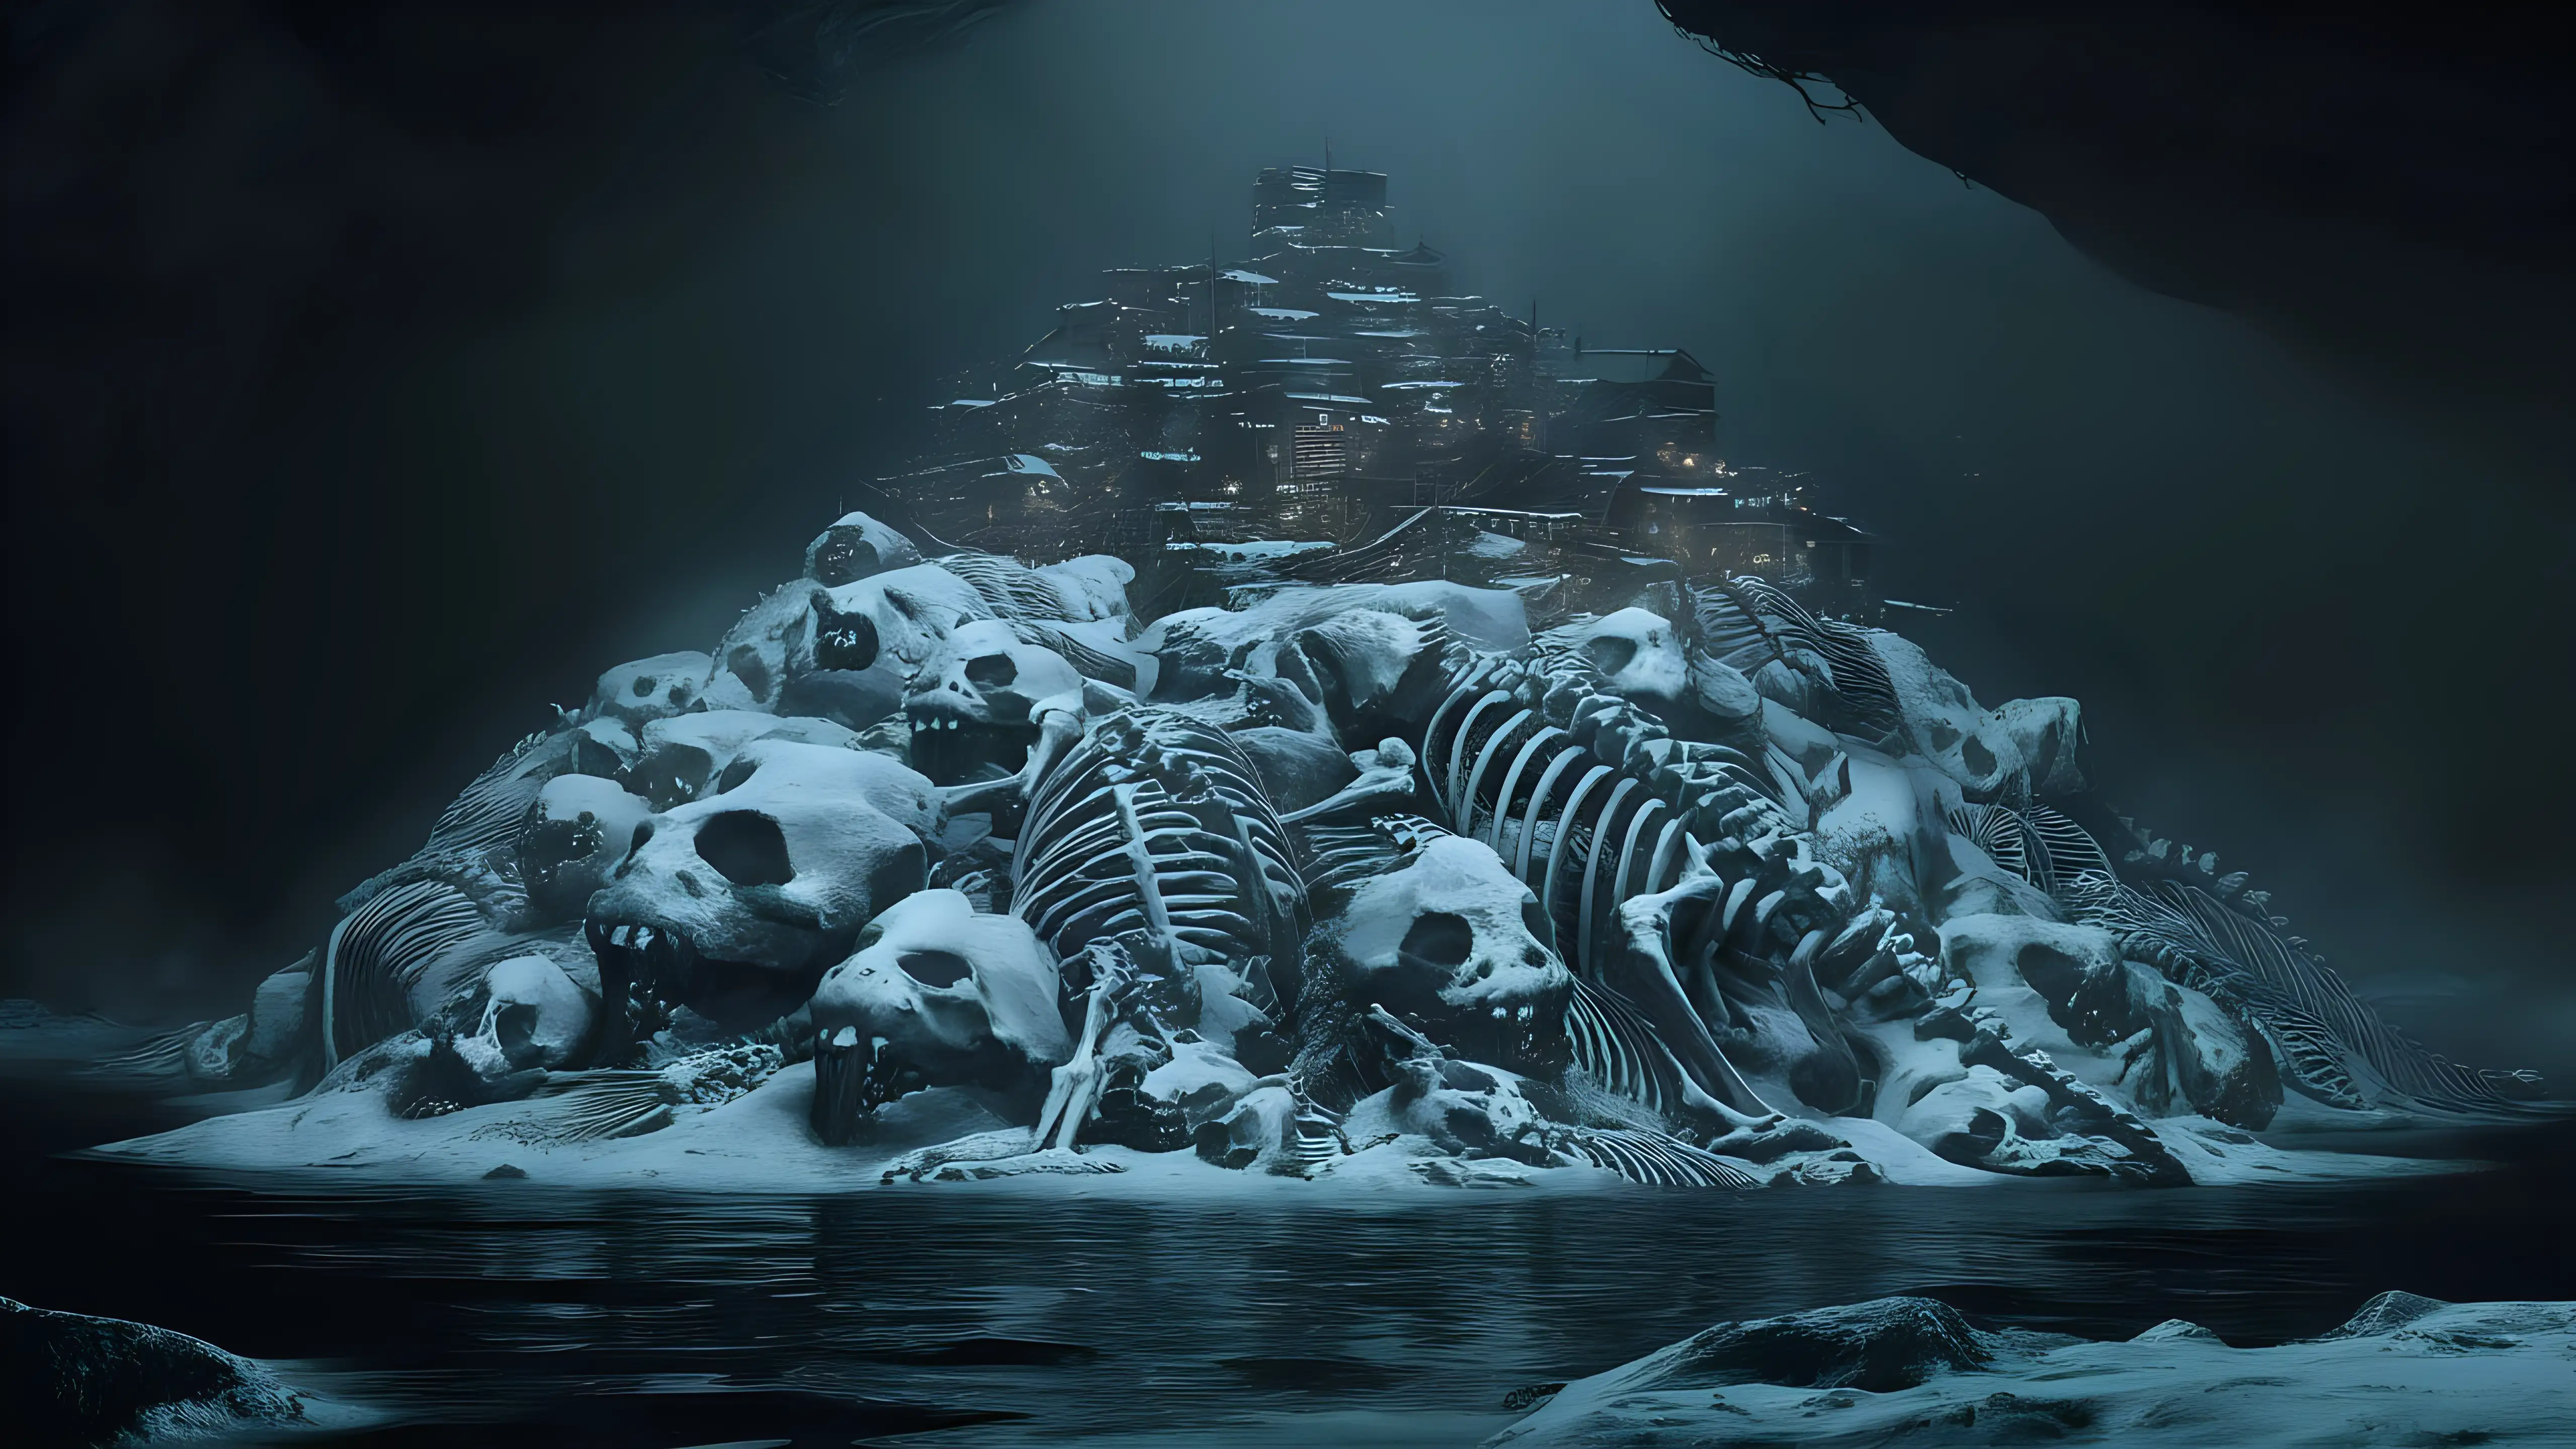 Snow-covered skeletons of various giant creatures rise from underwater in a massive uneven pile. On top of the skeletons is a ramshackle city that spans from the top of the pile to the water It has to be inside a giant cavern only seen far away to the distance and surrounded by black water. Light only comes from the village itself, there is also a lot of fog.